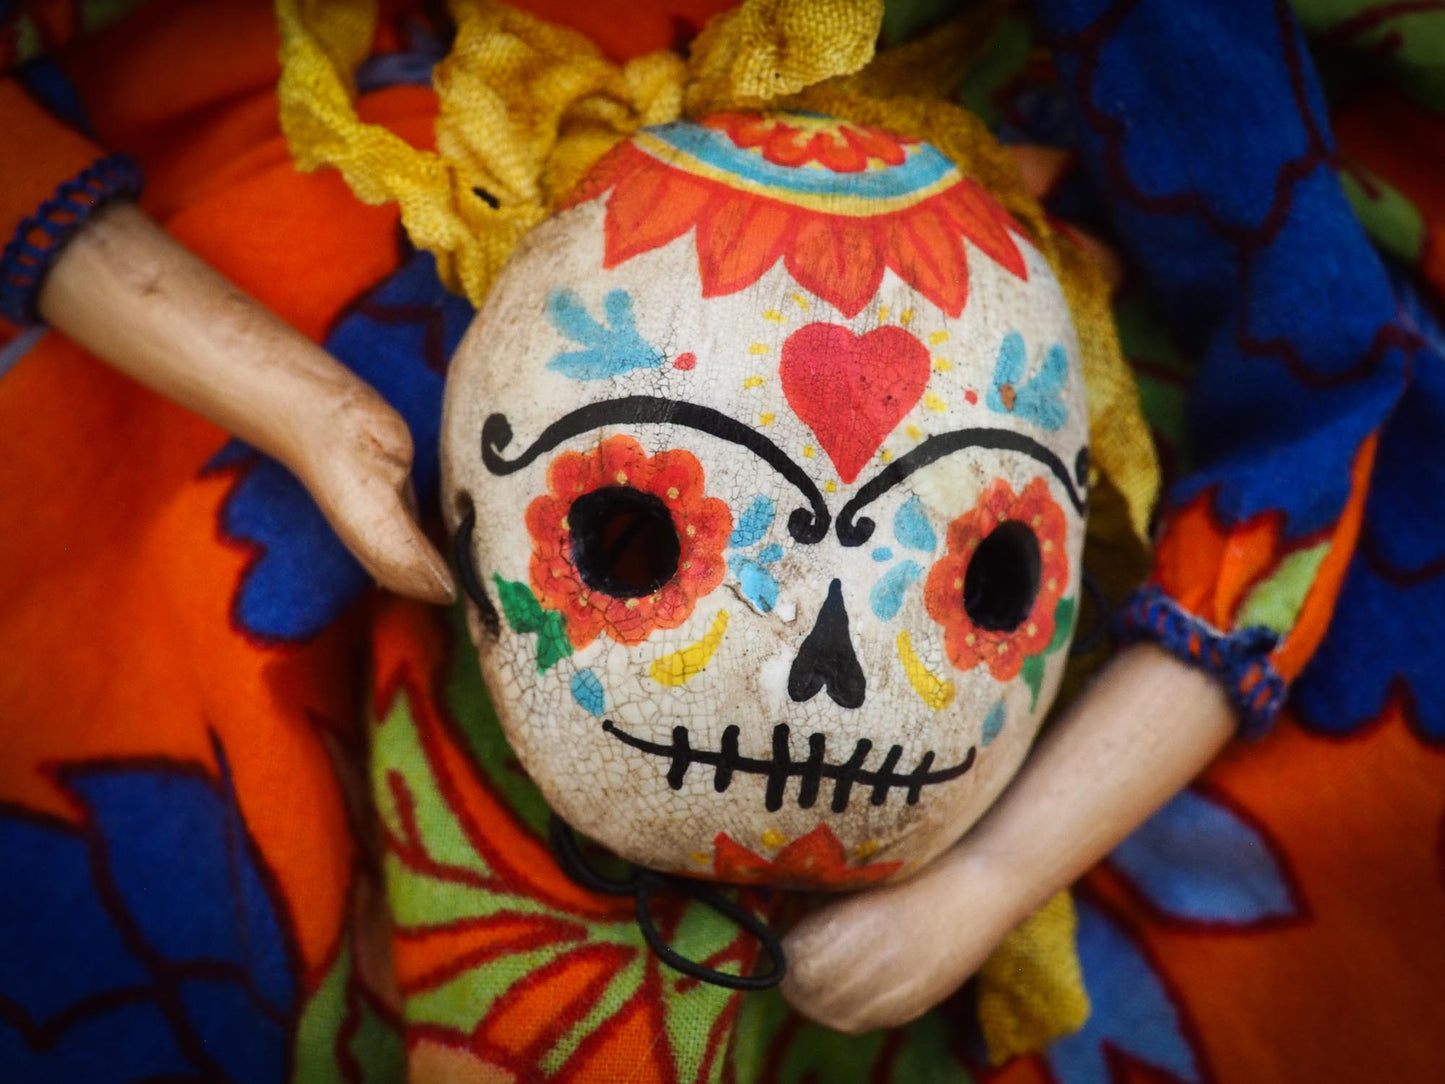 A beautiful handmade art doll by Danita, inspired by Mexican Folk art, Frida Kahlo and The Day Of the Dead. She wears a colorful native motif dress, an unmistakable unibrow, a colorful Dia De los Muertos Catrina skull mask and the signature amazing eyes of Danita Art.